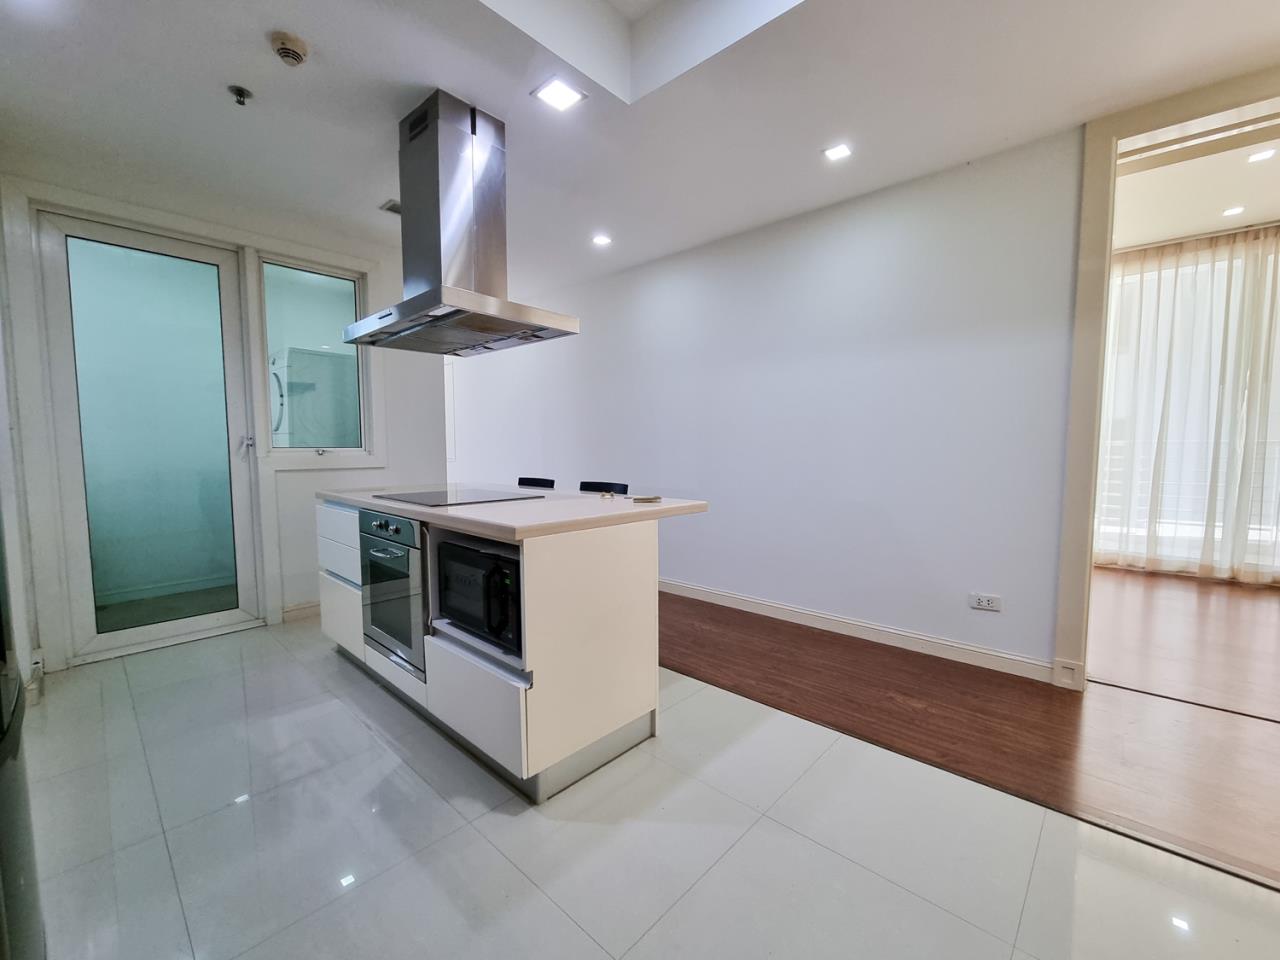 Japanthai Property Agency's *Siri Residence* Huge terrace rare 110sqm 2bed in Phrom Phong area  (5 mins walk to BTS PhromPhong)* 18